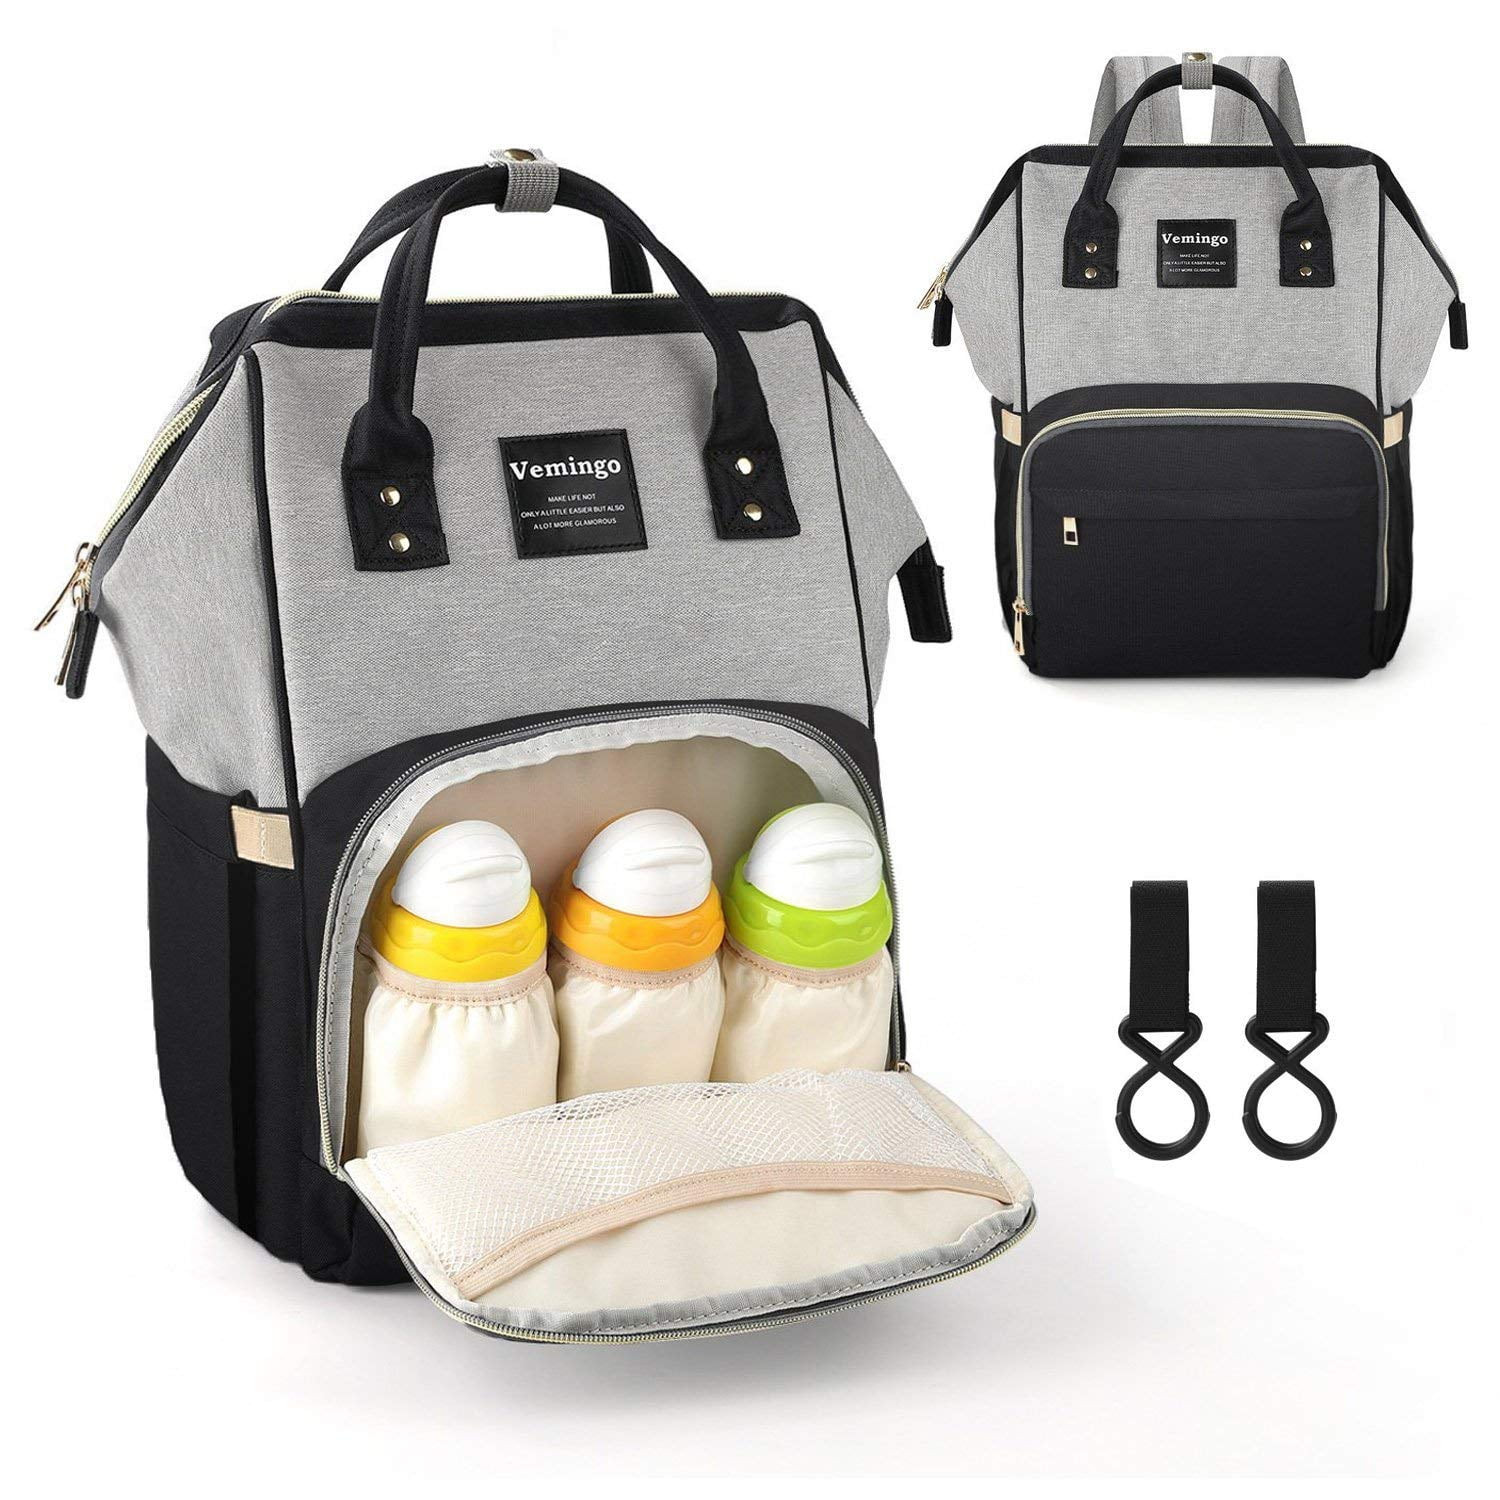 Baby Diaper Bag Backpack : Big Waterproof Nappy Bag for Mom & Dad Stylish & Durable Baby Bag for Boys & Girls Travel Tote Grey Adjustable Stroller Strap 